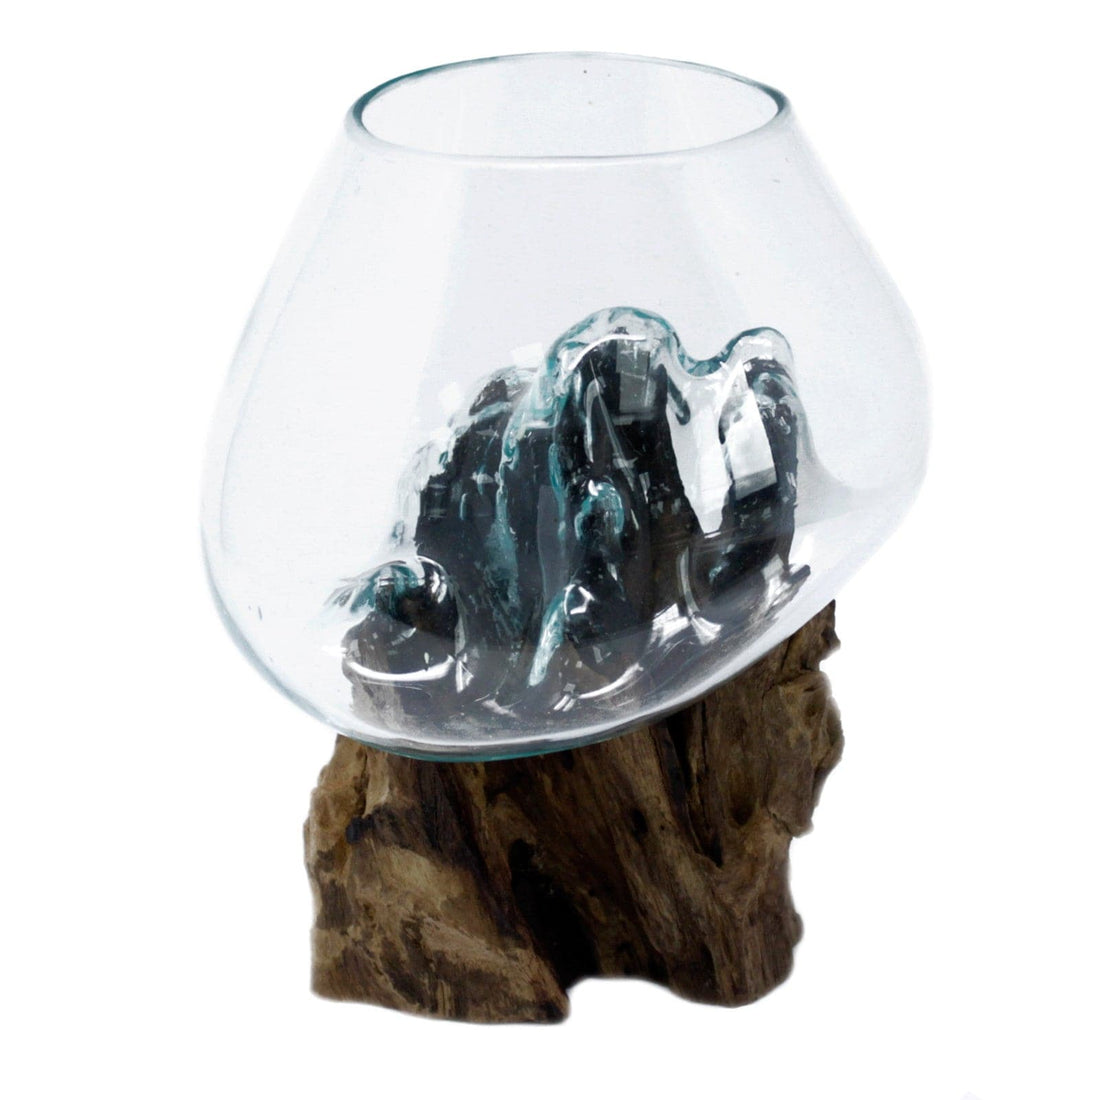 Molten Glass on Wood - Large Bowl - best price from Maltashopper.com MGW-03